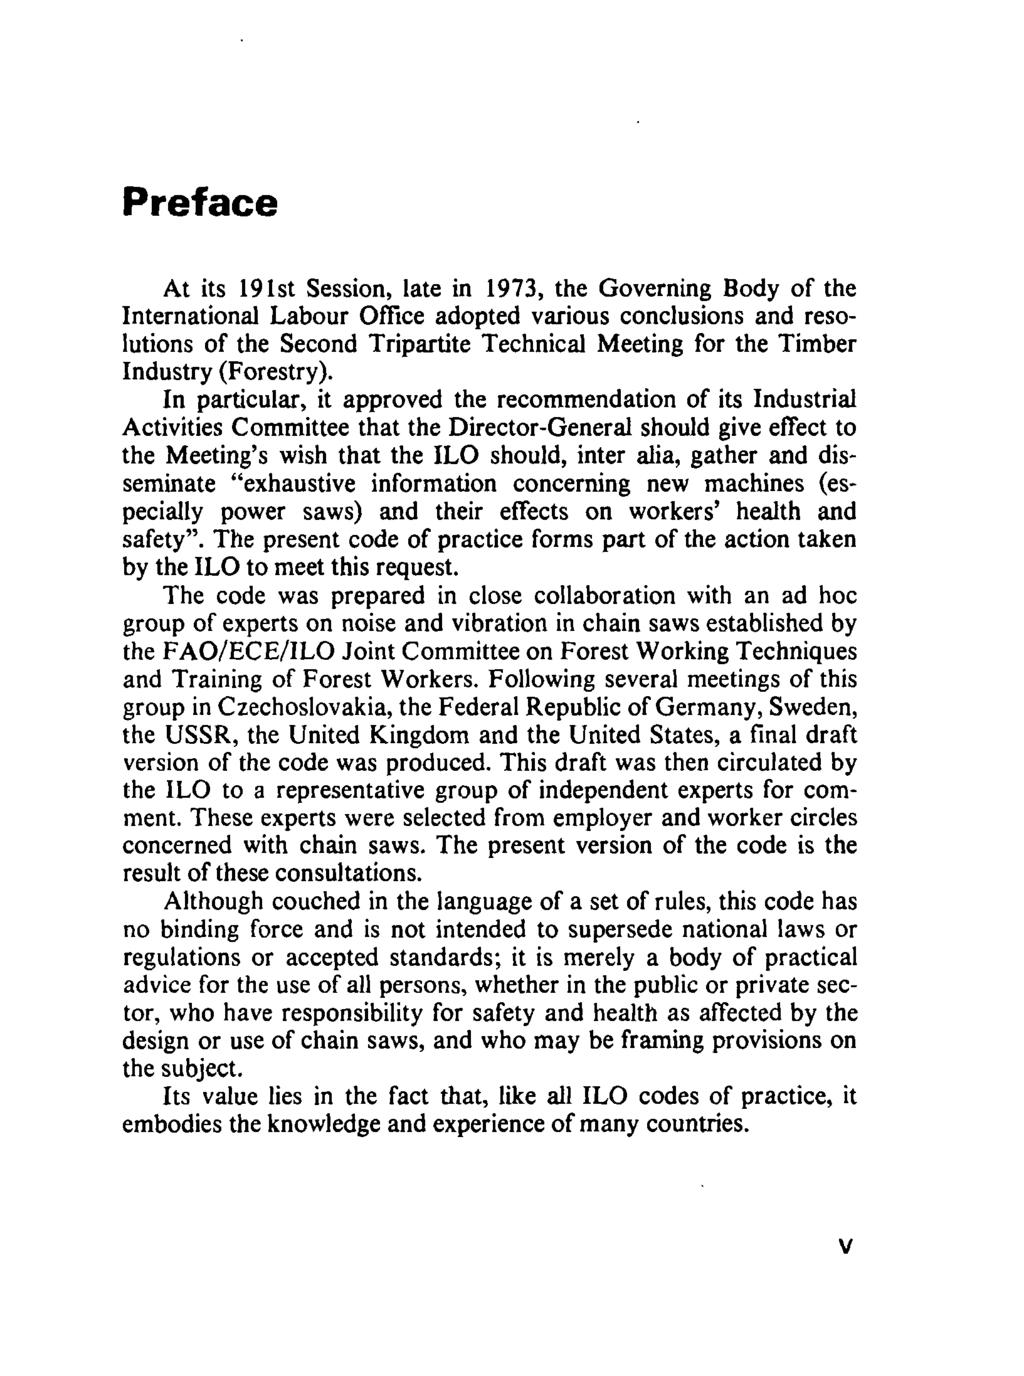 Preface At its 191st Session, late in 1973, the Governing Body of the International Labour Office adopted various conclusions and resolutions of the Second Tripartite Technical Meeting for the Timber